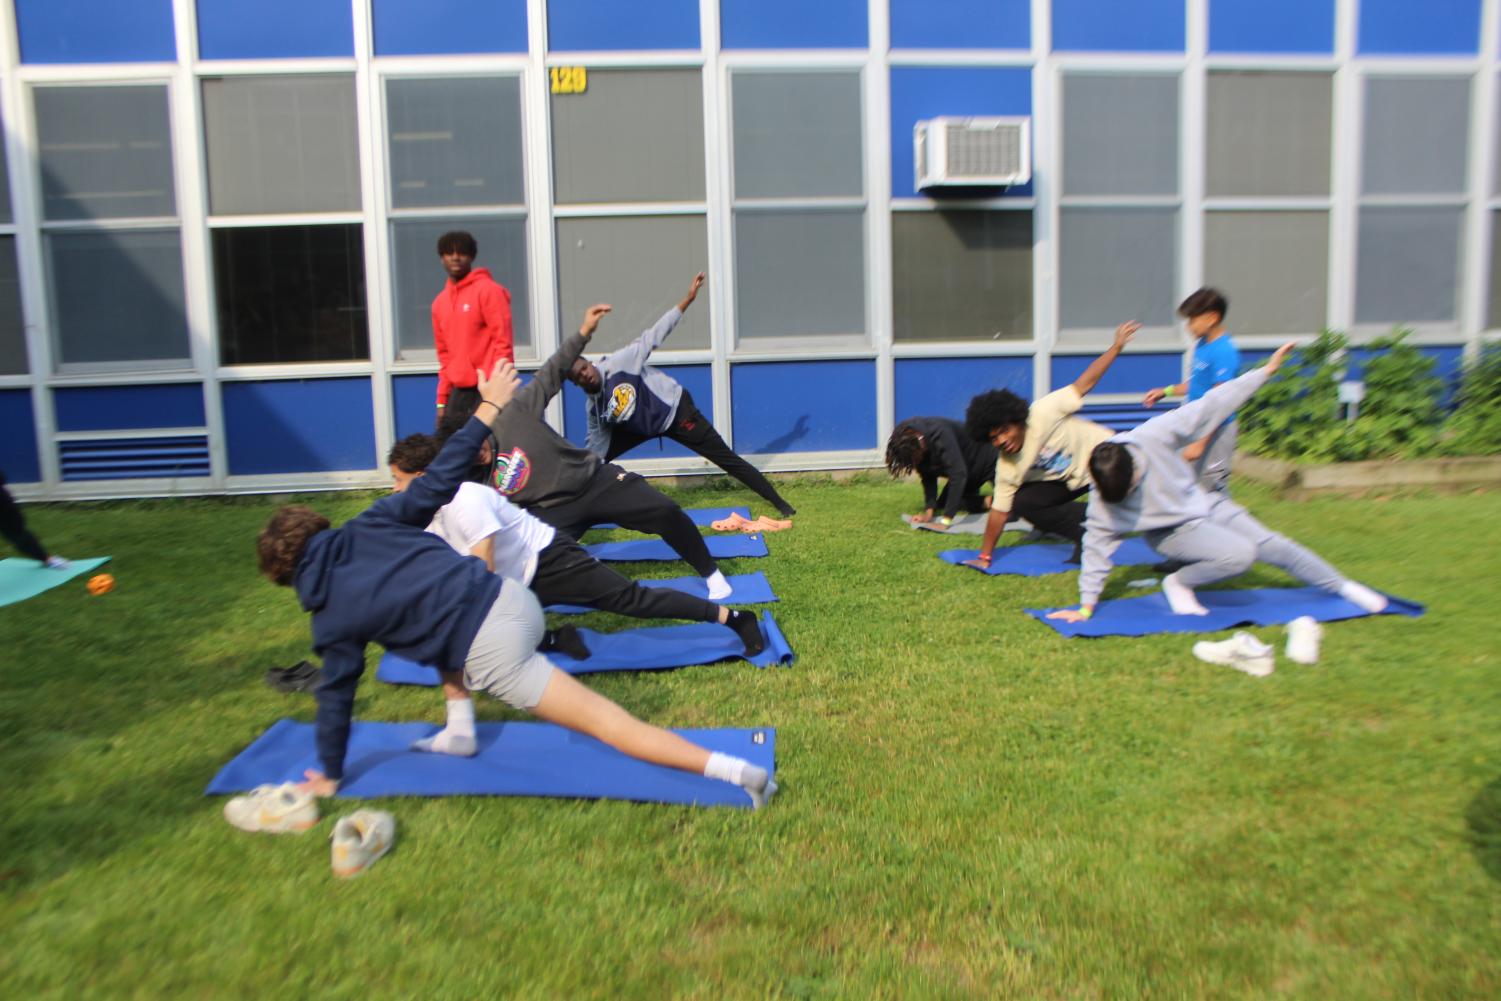 One activity students participated in at the mental health fair was yoga to improve strength and breathing.